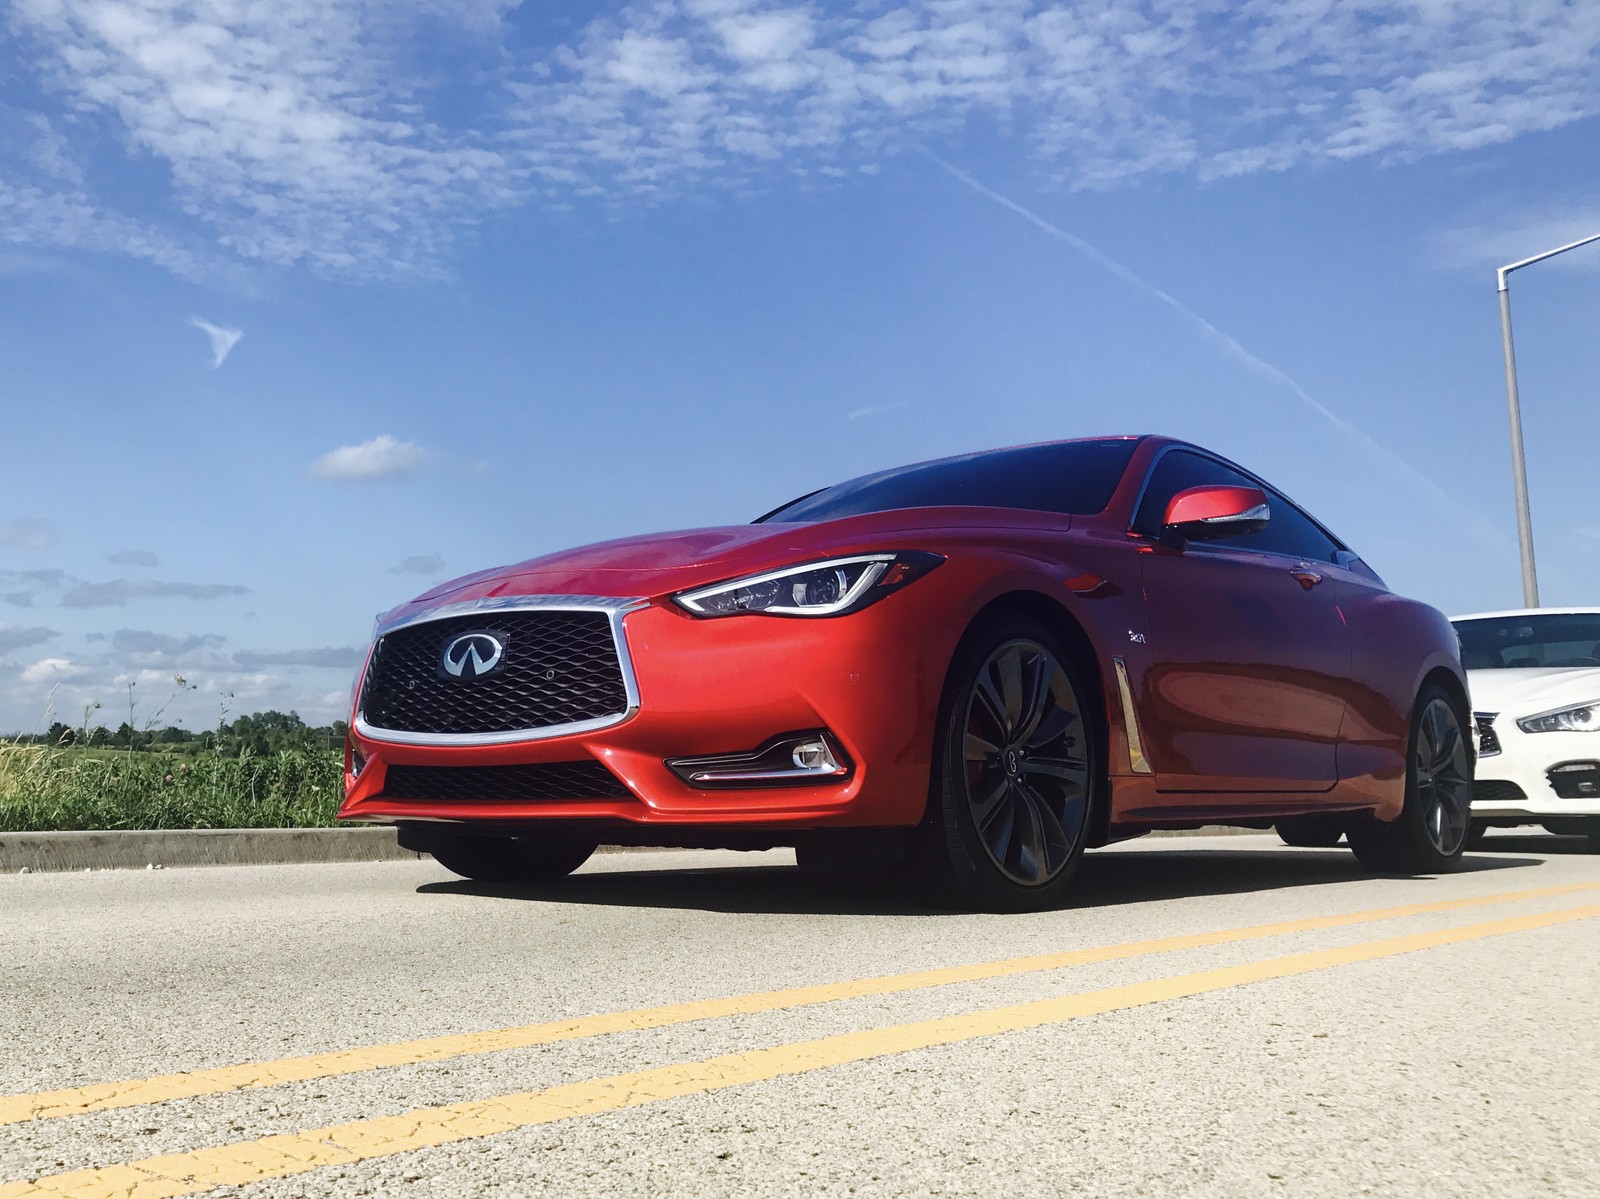 2017 Red Infiniti Q60 Red Alpha picture, mods, upgrades